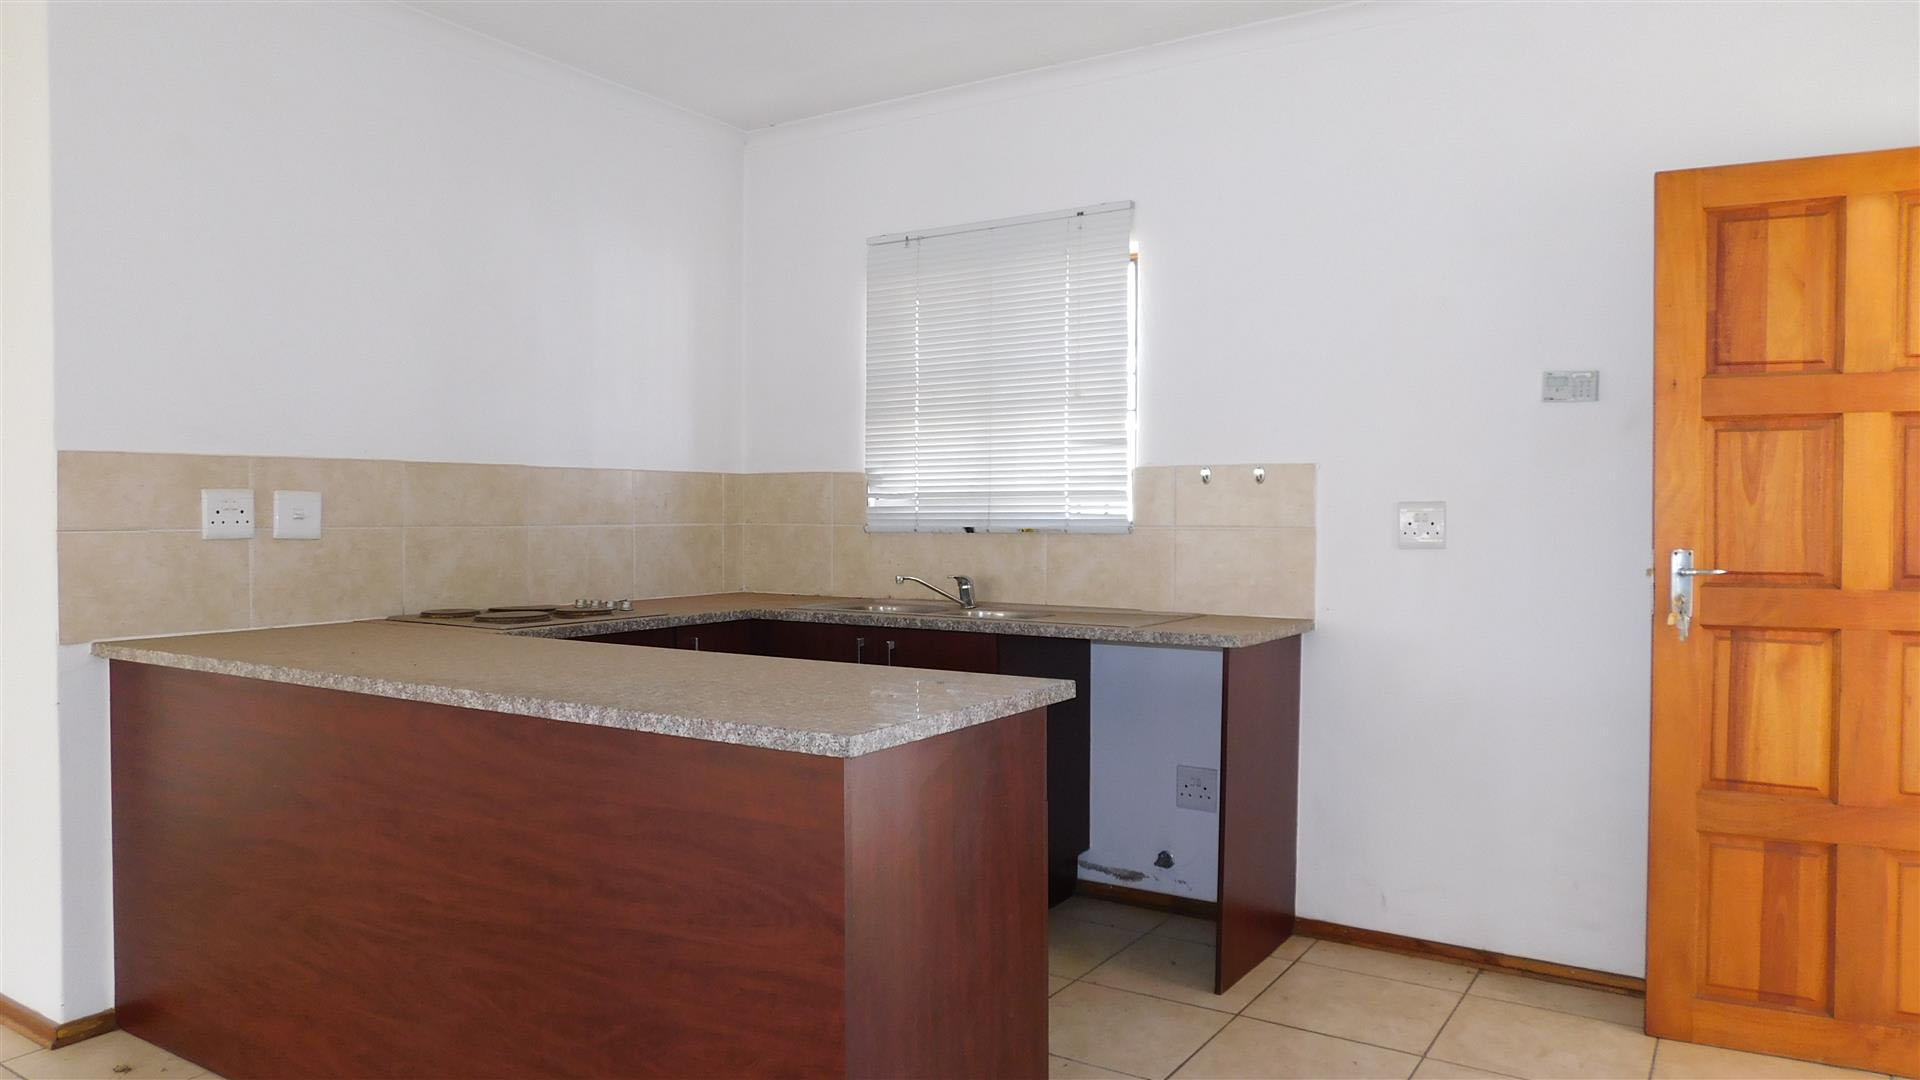 Kitchen - 10 square meters of property in Hesteapark